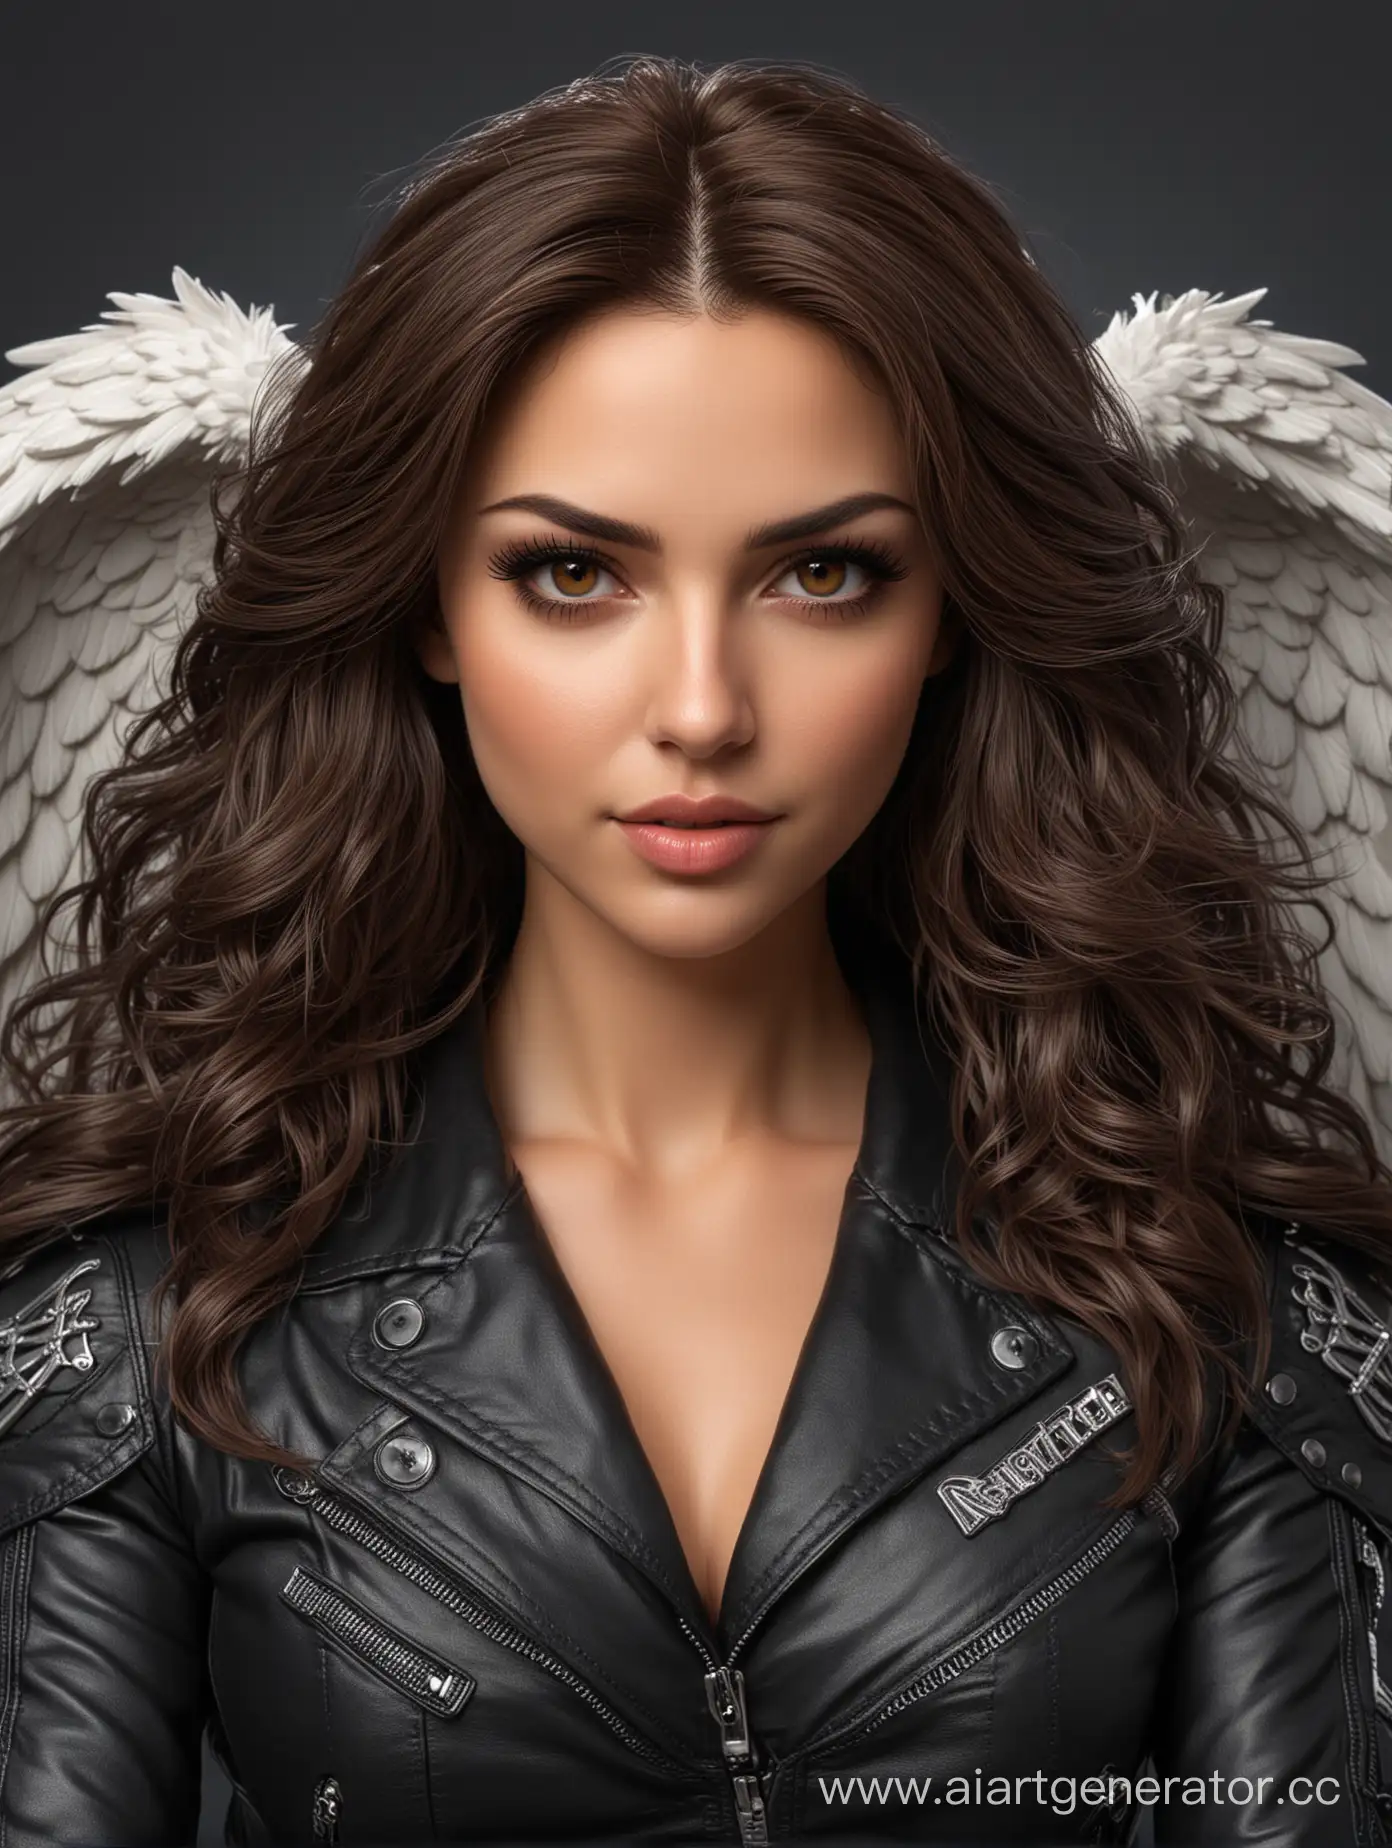 Confident-Young-Woman-in-Cool-Biker-Outfit-with-Angel-Wings